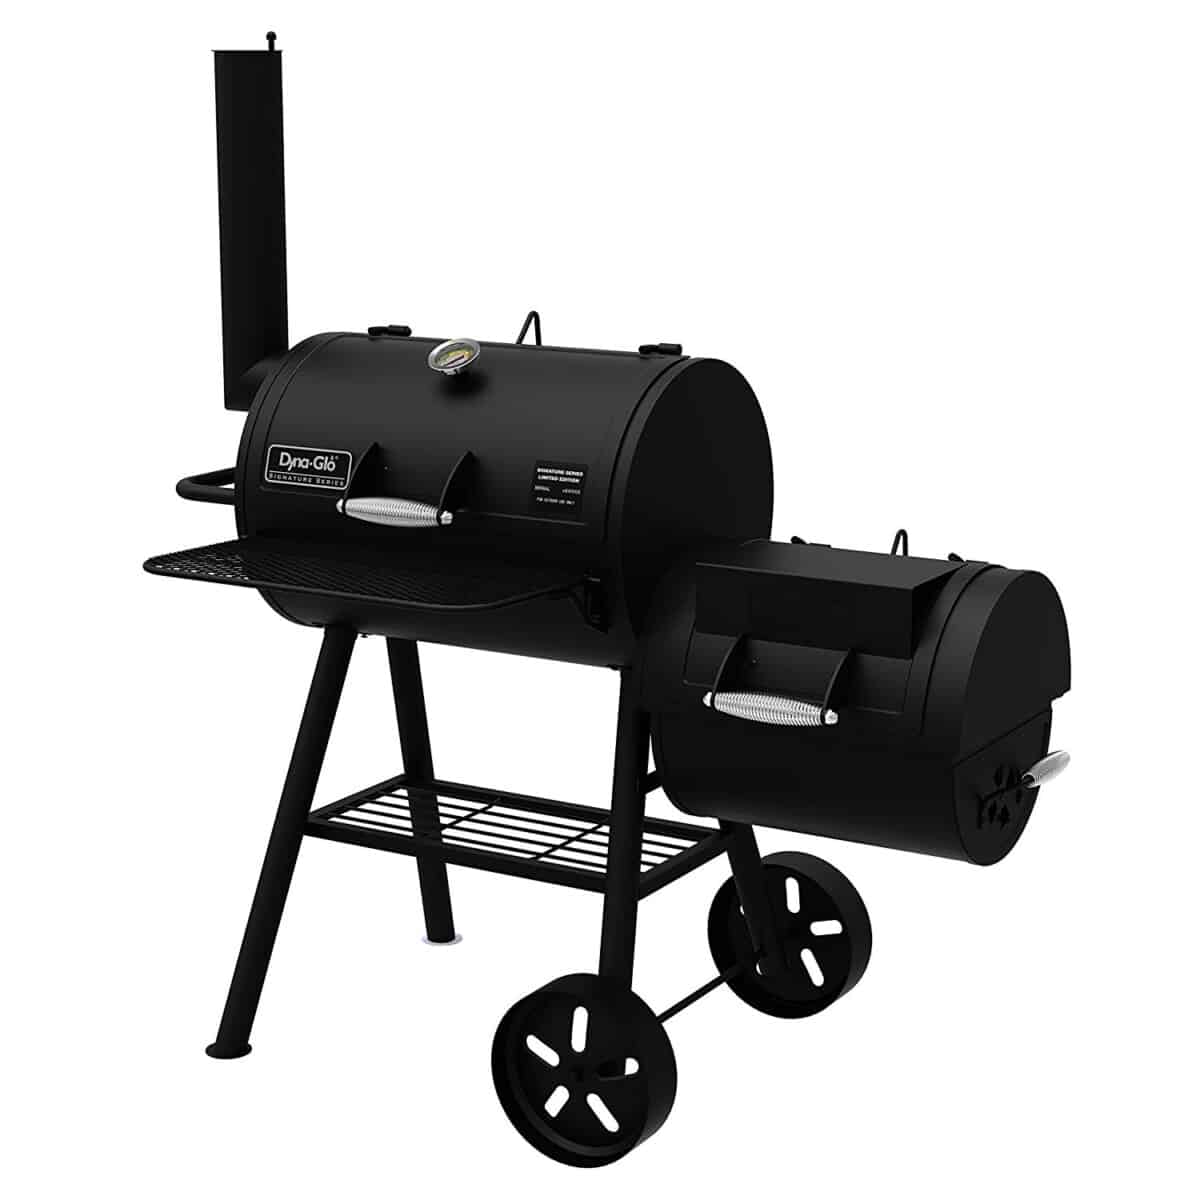 Dyna-Glo Barrel Charcoal Grill Review